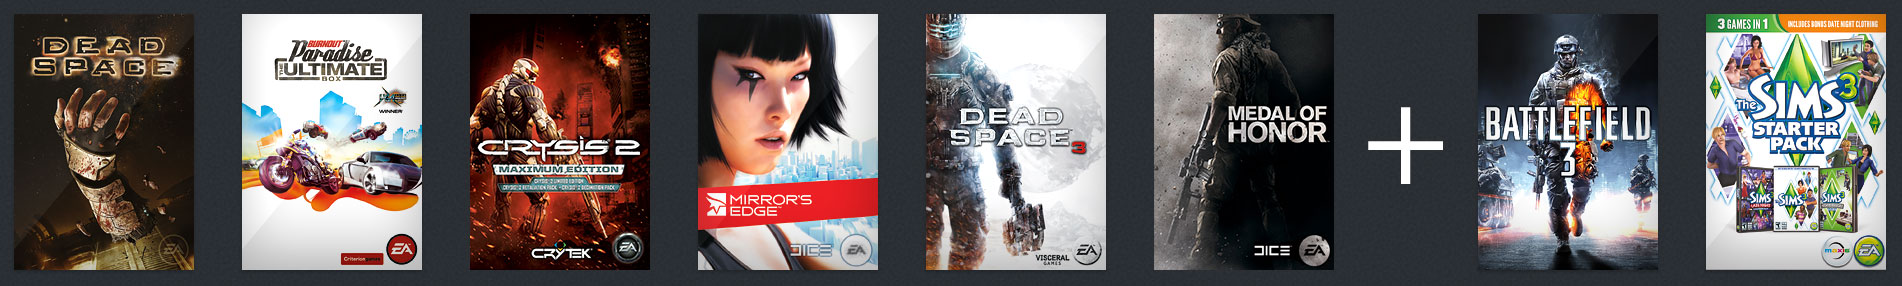 Humble Origin Bundle launches with Mirror's Edge, Crysis 2